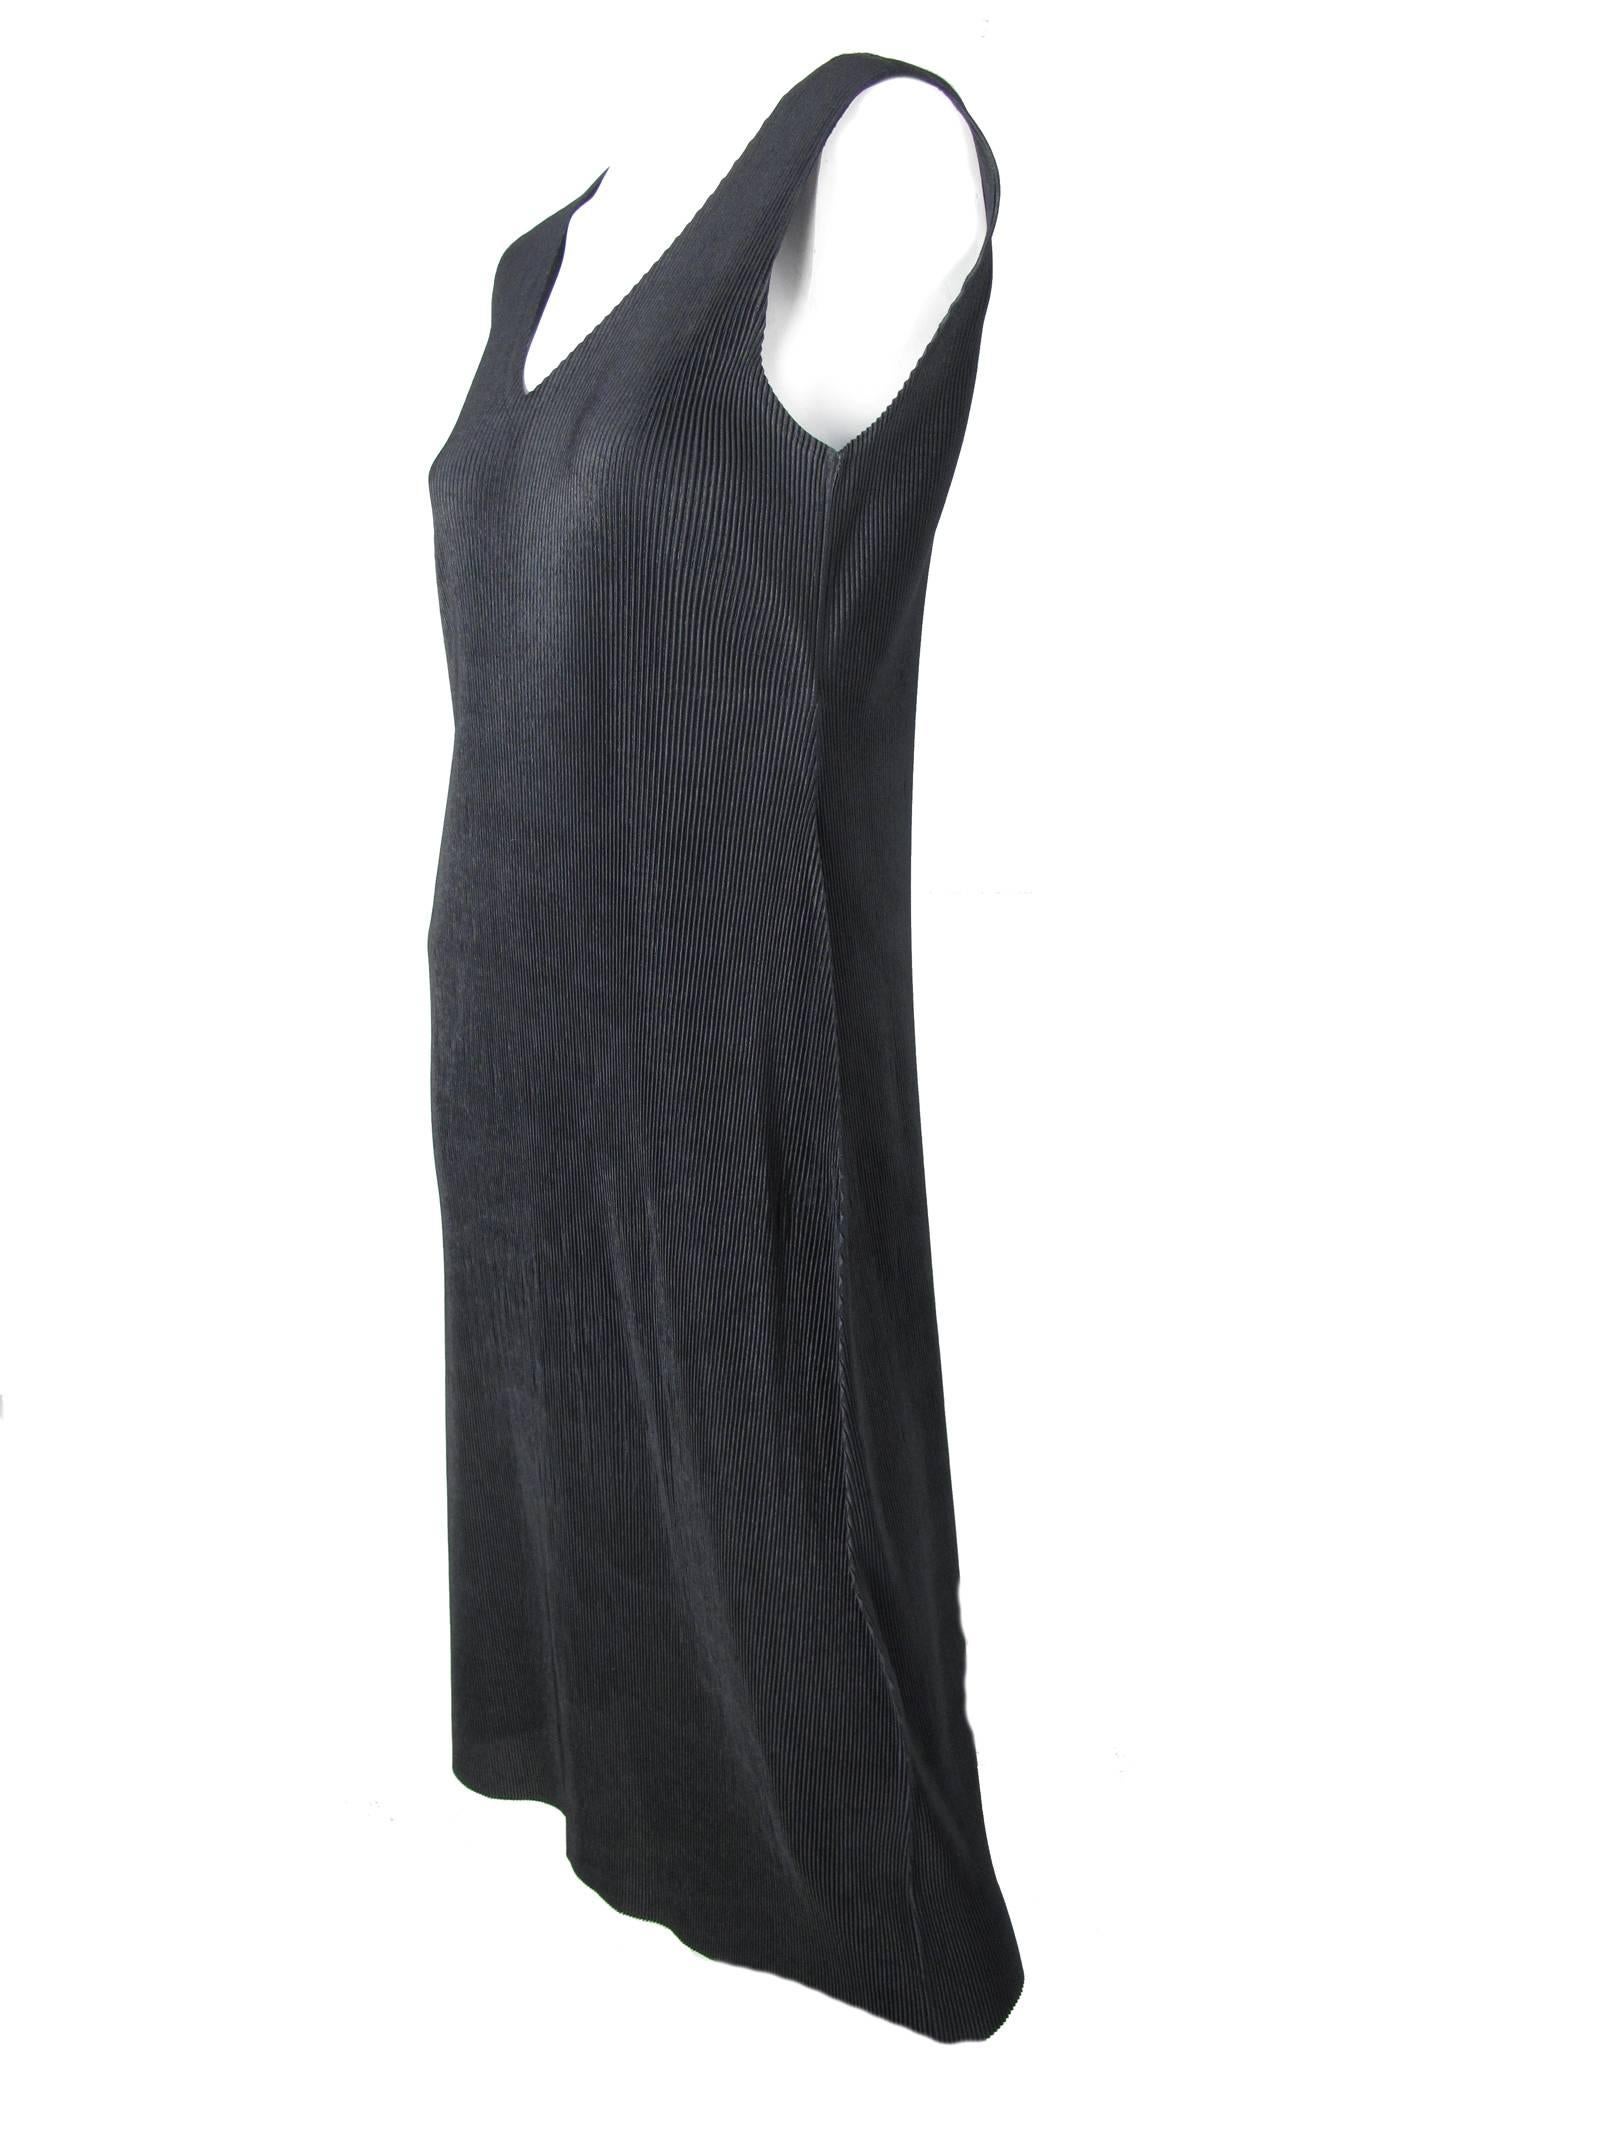 Issey Miyake black pleated sleeveless dress.  Polyester. Condition: Excellent.  Made in Japan.Size 3
We accept returns for refund, please see our terms.  Free Ground Shipping within the US! Please let us know if you have any questions.